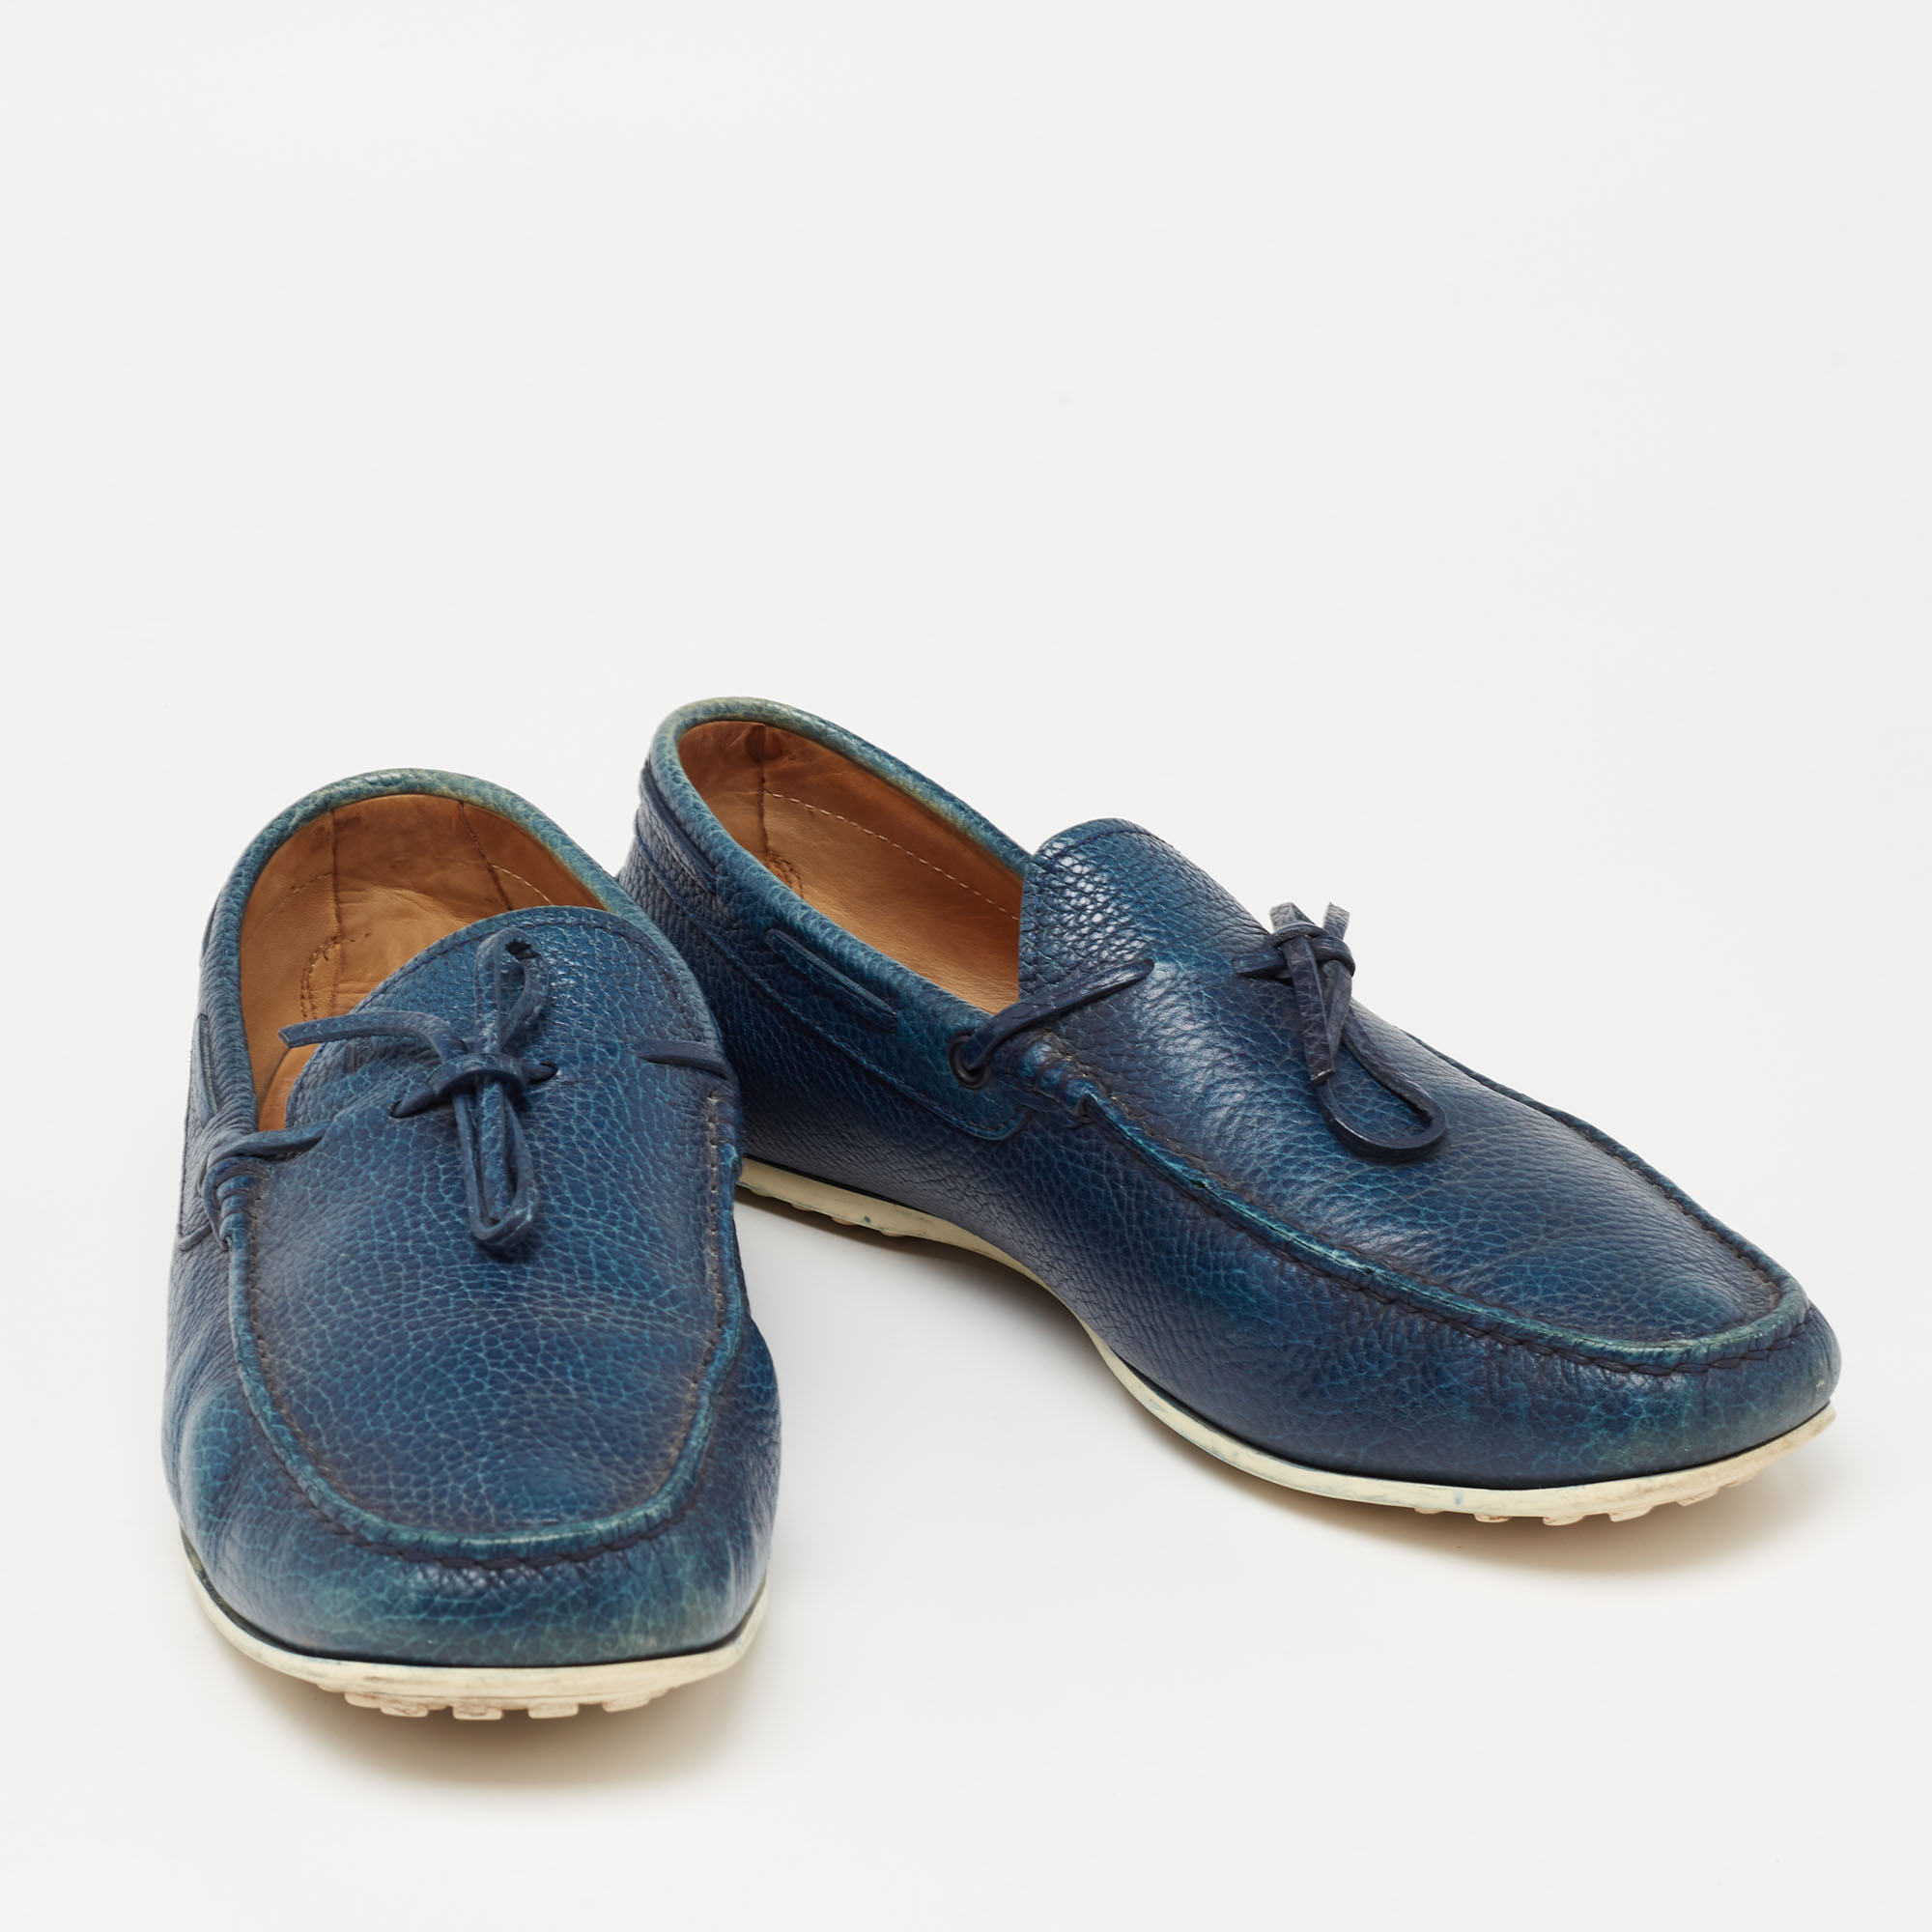 Tod's Blue Leather Bow Slip-On Loafers Size 42.5